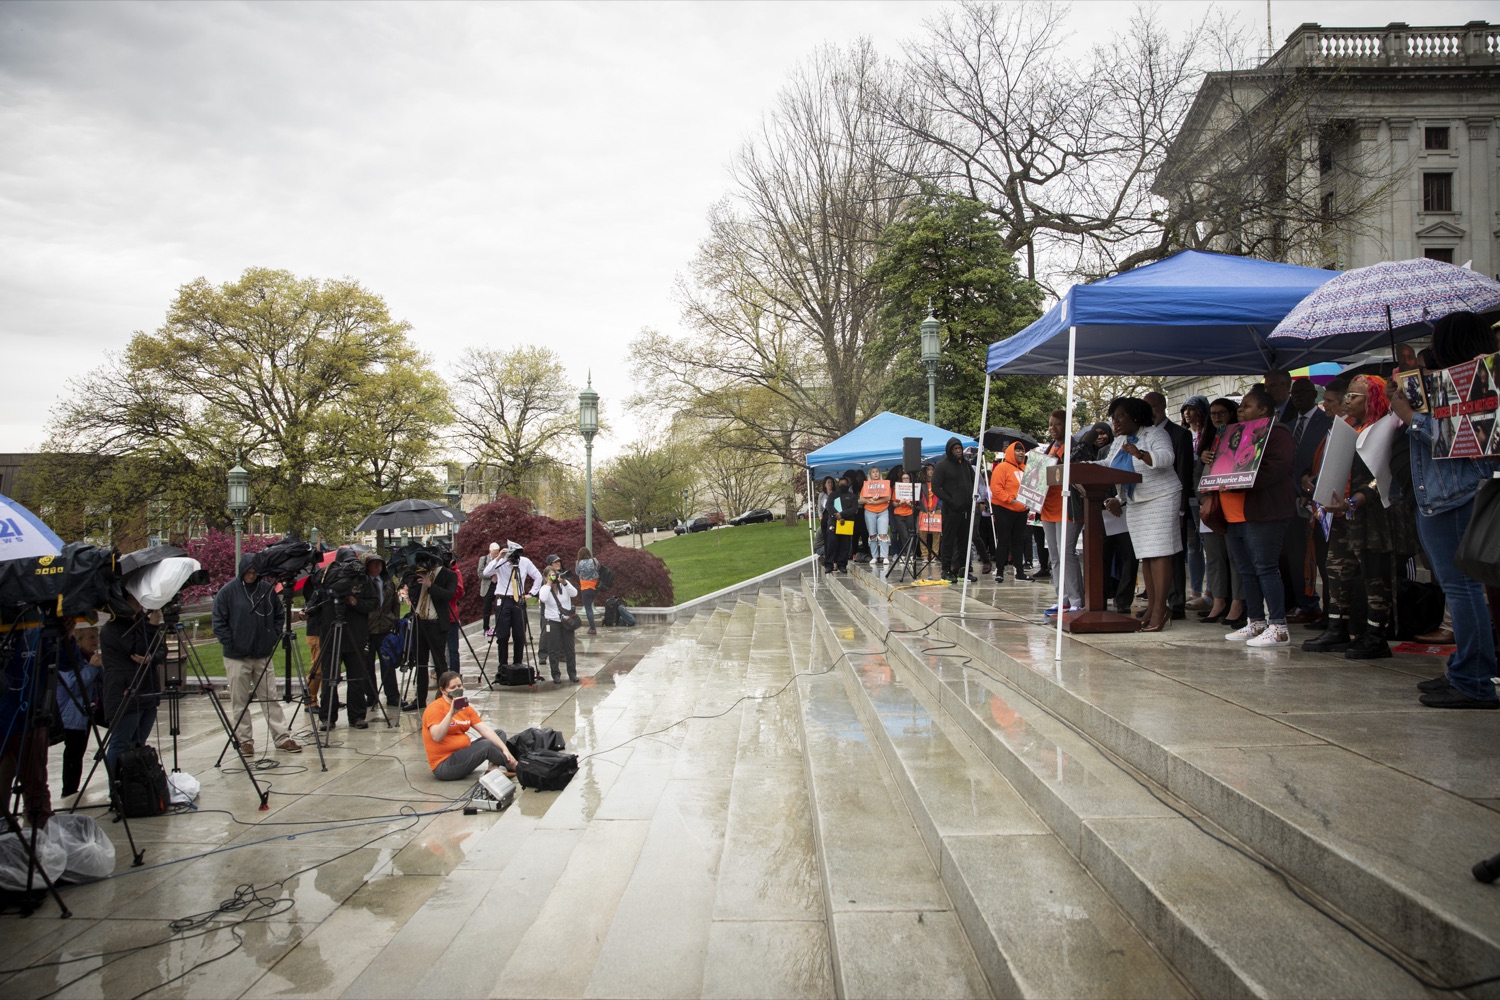 Rep. Joanna McClinton calls for legislative action to save lives against gun violence, in Harrisburg, PA on April 26, 2022.<br><a href="https://filesource.amperwave.net/commonwealthofpa/photo/20782_gov_ceaseFirePA_06.JPG" target="_blank">⇣ Download Photo</a>